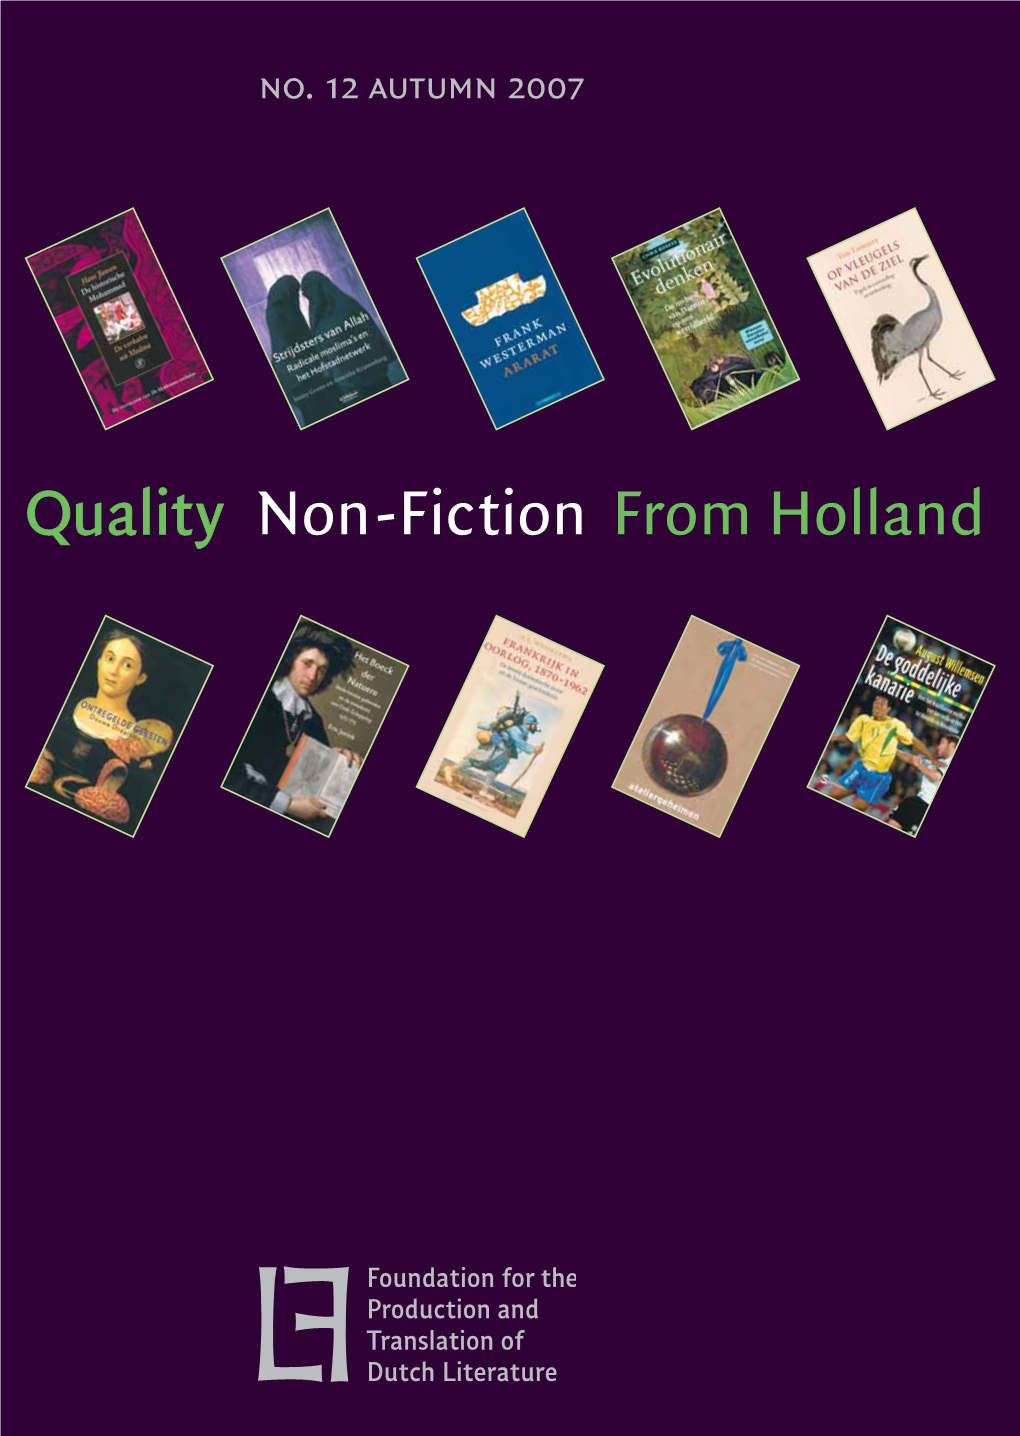 Quality Non-Fiction from Holland Is (De Larf) (Het Huis Van Khala) Published by the Foundation for Published in German by Blessing